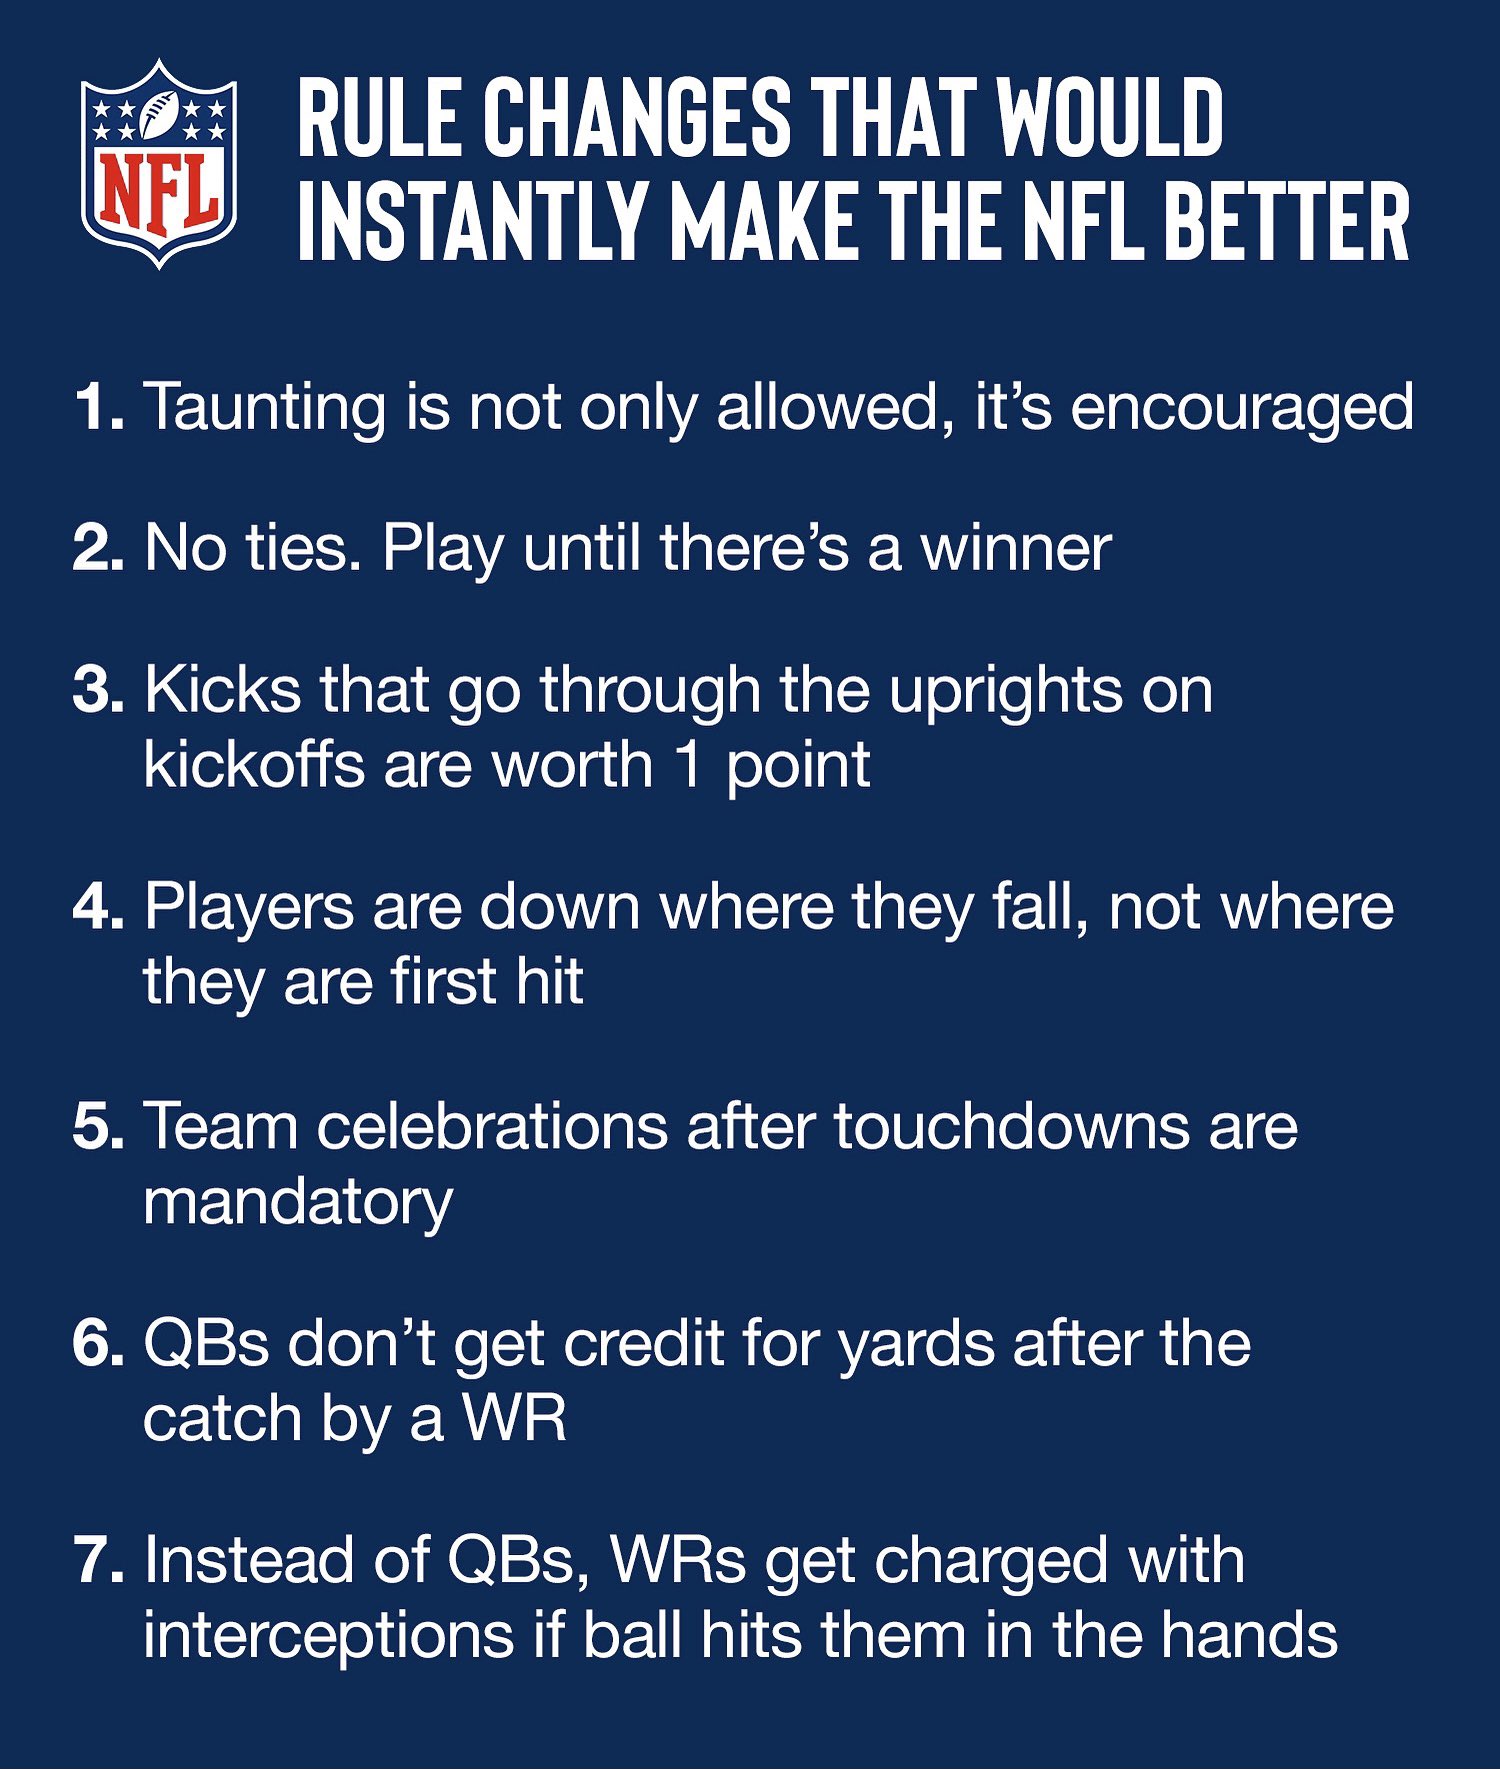 NFL Memes on Twitter "A list of rule changes that would instantly make